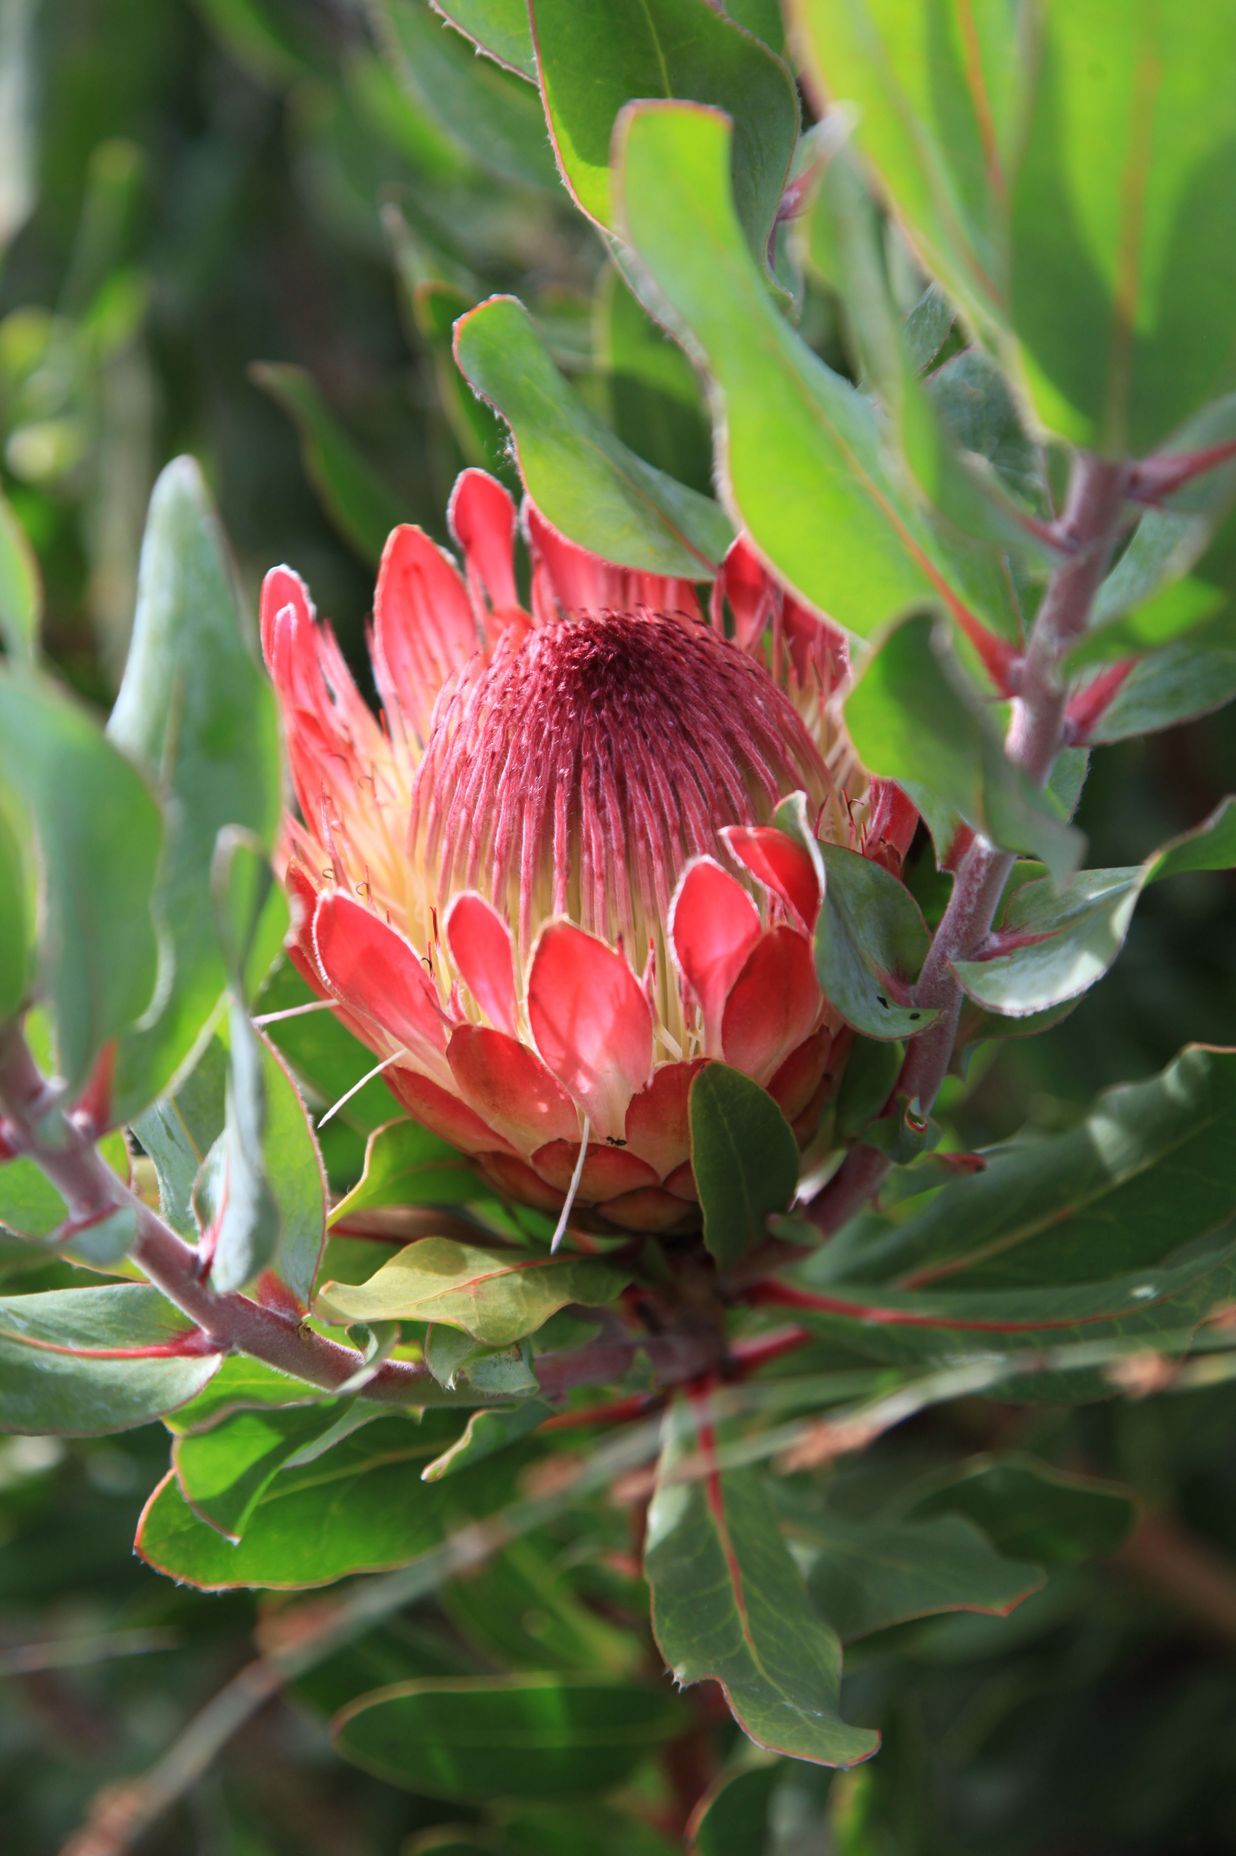 Hardy South African proteas can withstand the long hot summers with no rain